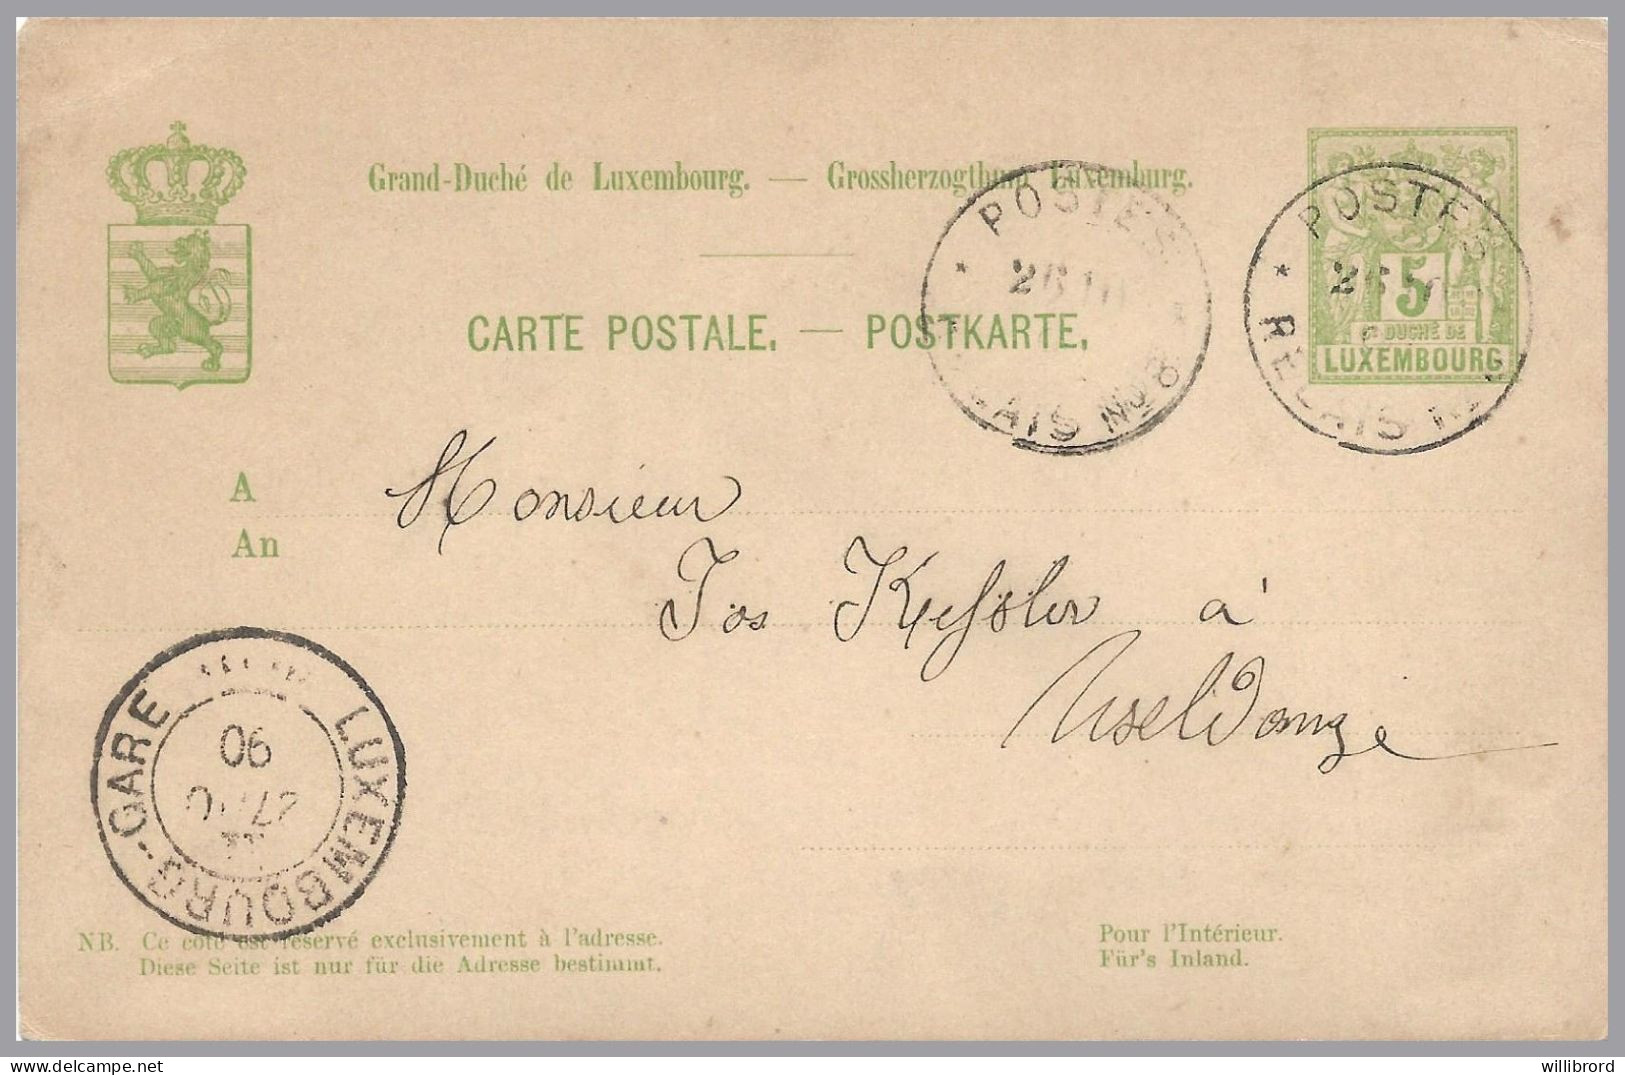 LUXEMBOURG - 1890 POSTES RELAIS No. 8 [RAMBROUCH] To Useldange - 5c Green Allegory Postal Card (3rd Issue) - 1882 Allegory